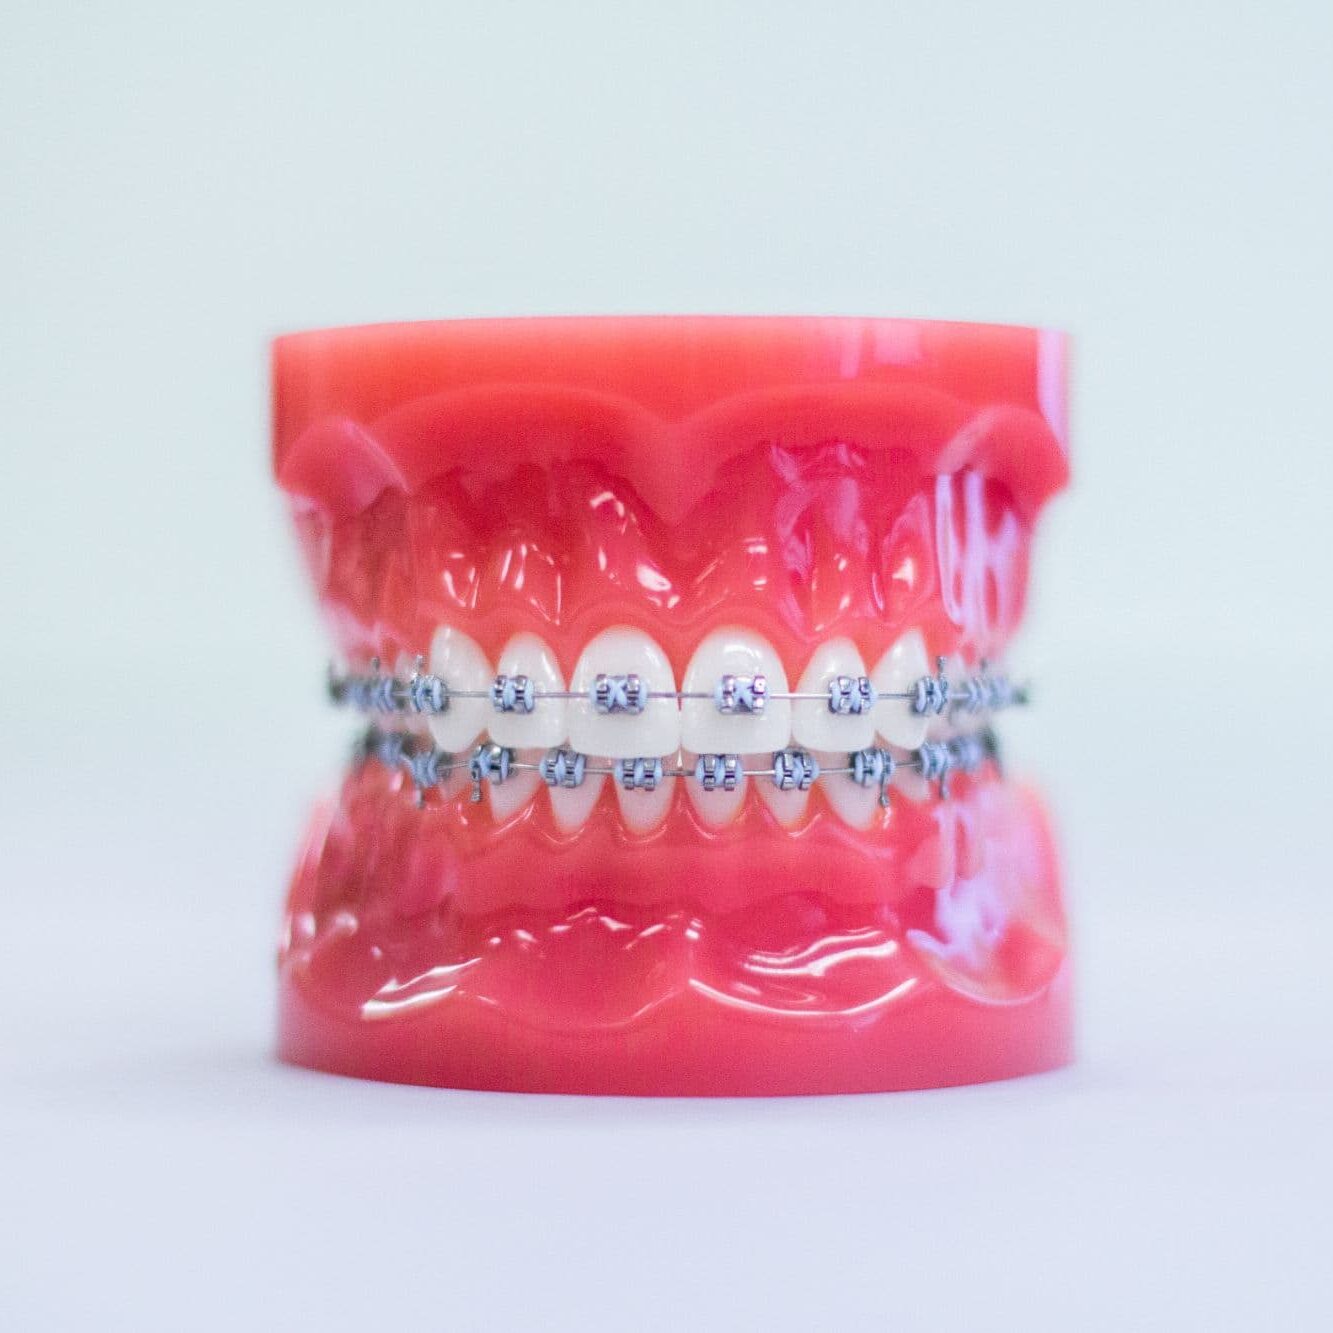 Traditional braces